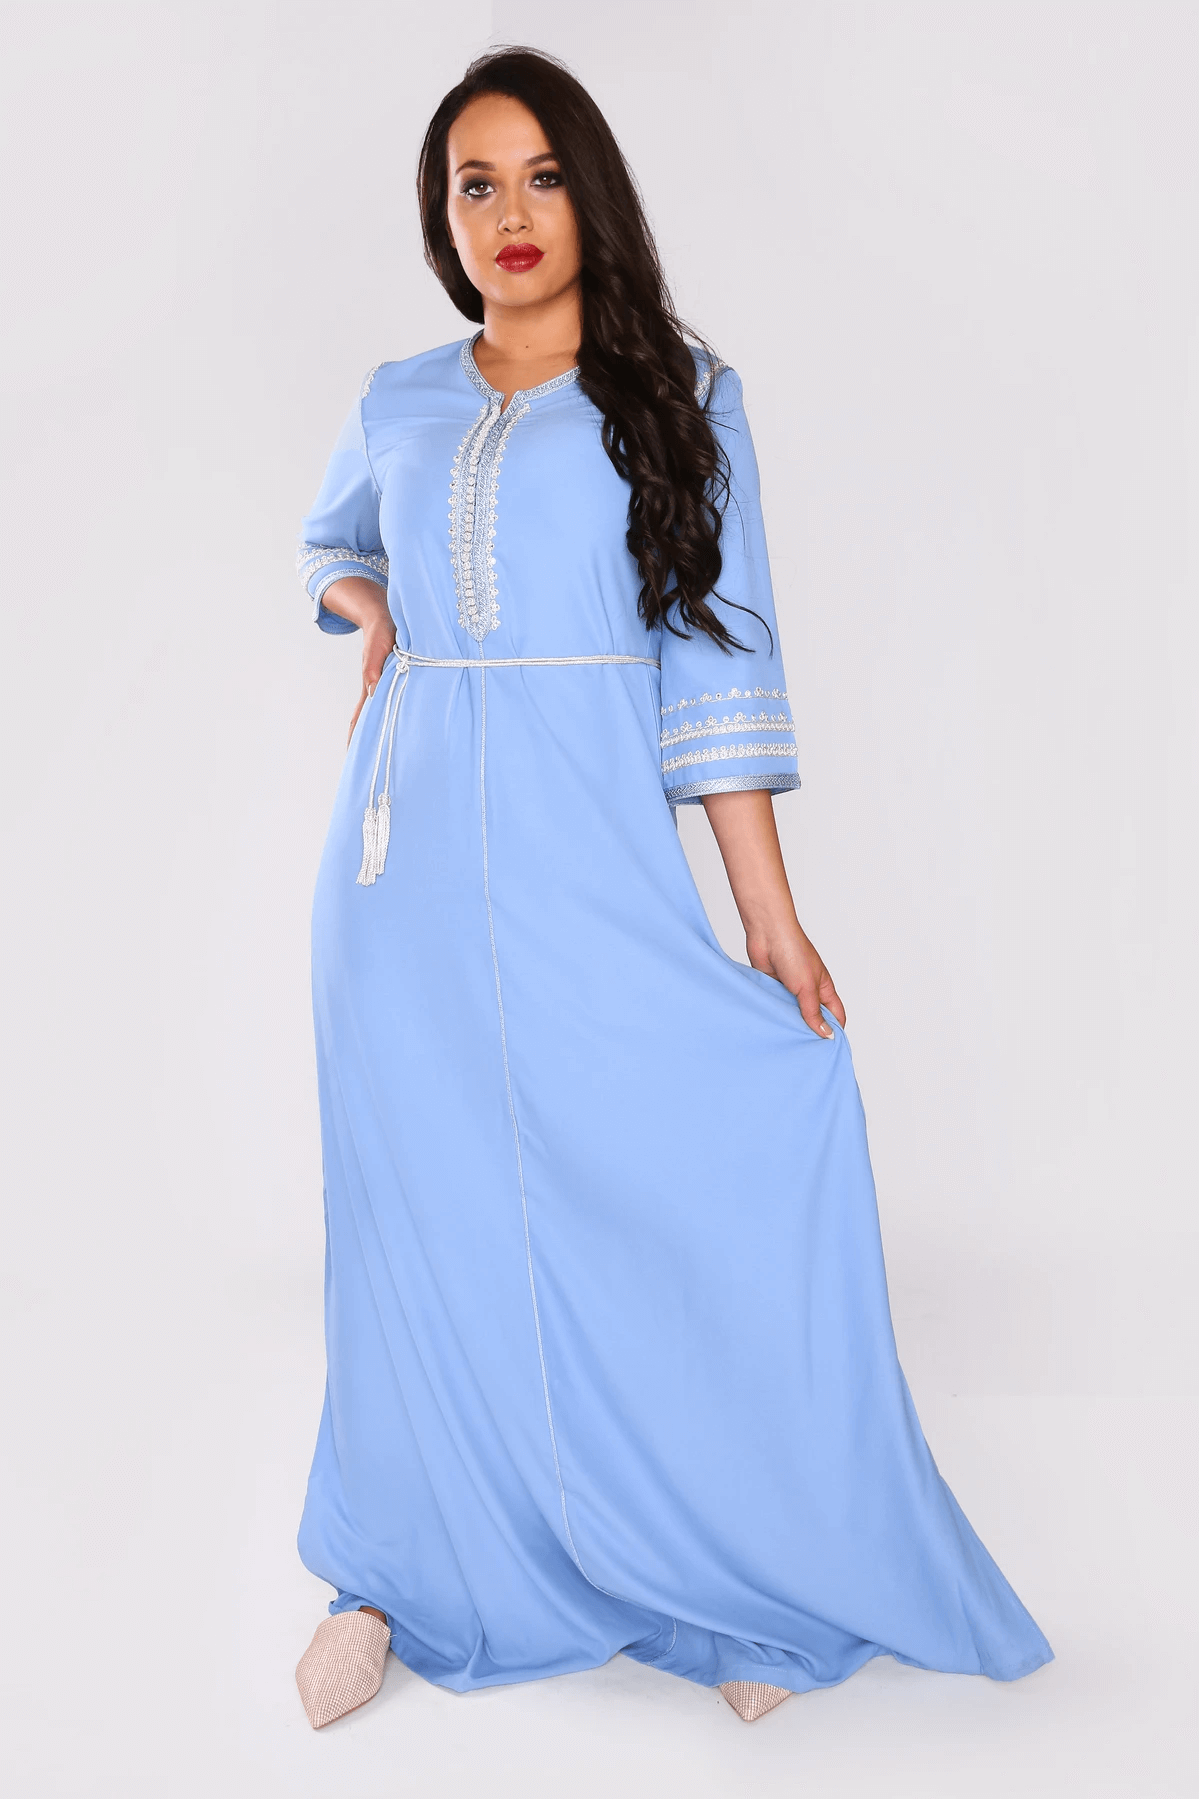 Lebssa Lucrece Occasion Wear Cropped Sleeve Full-Length Evening Dress with Belt in Blue